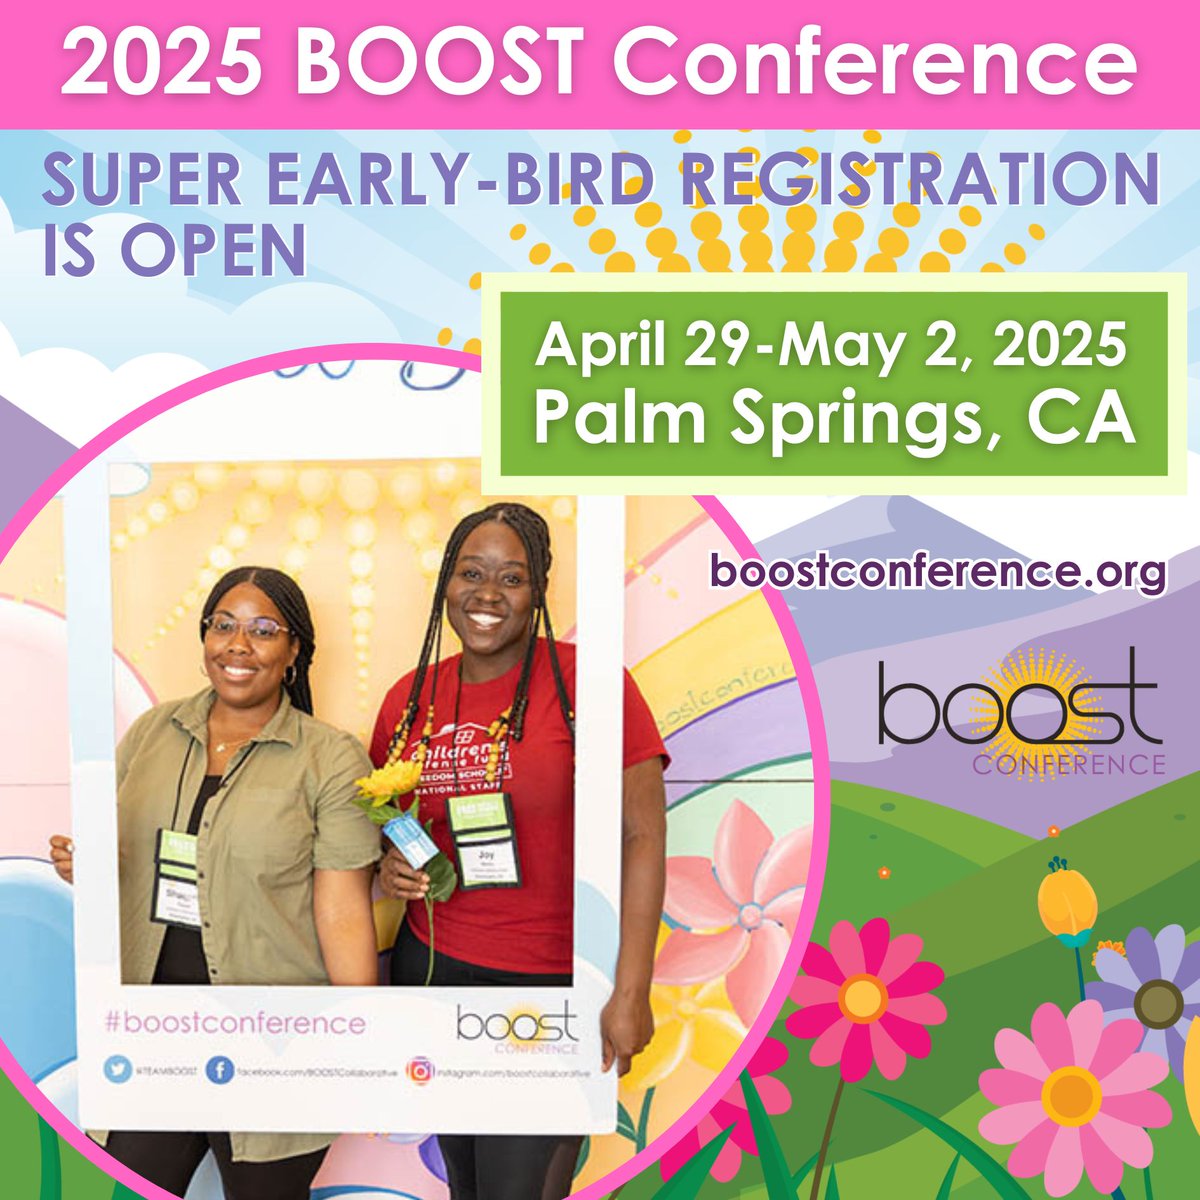 2025 #boostconference registration is open! Super Early-Bird registration is available now through 6/30 at our lowest rate of the year. Register your team today for the largest global convening of in and out-of-school time educators, just like YOU. boostconference.org/registration